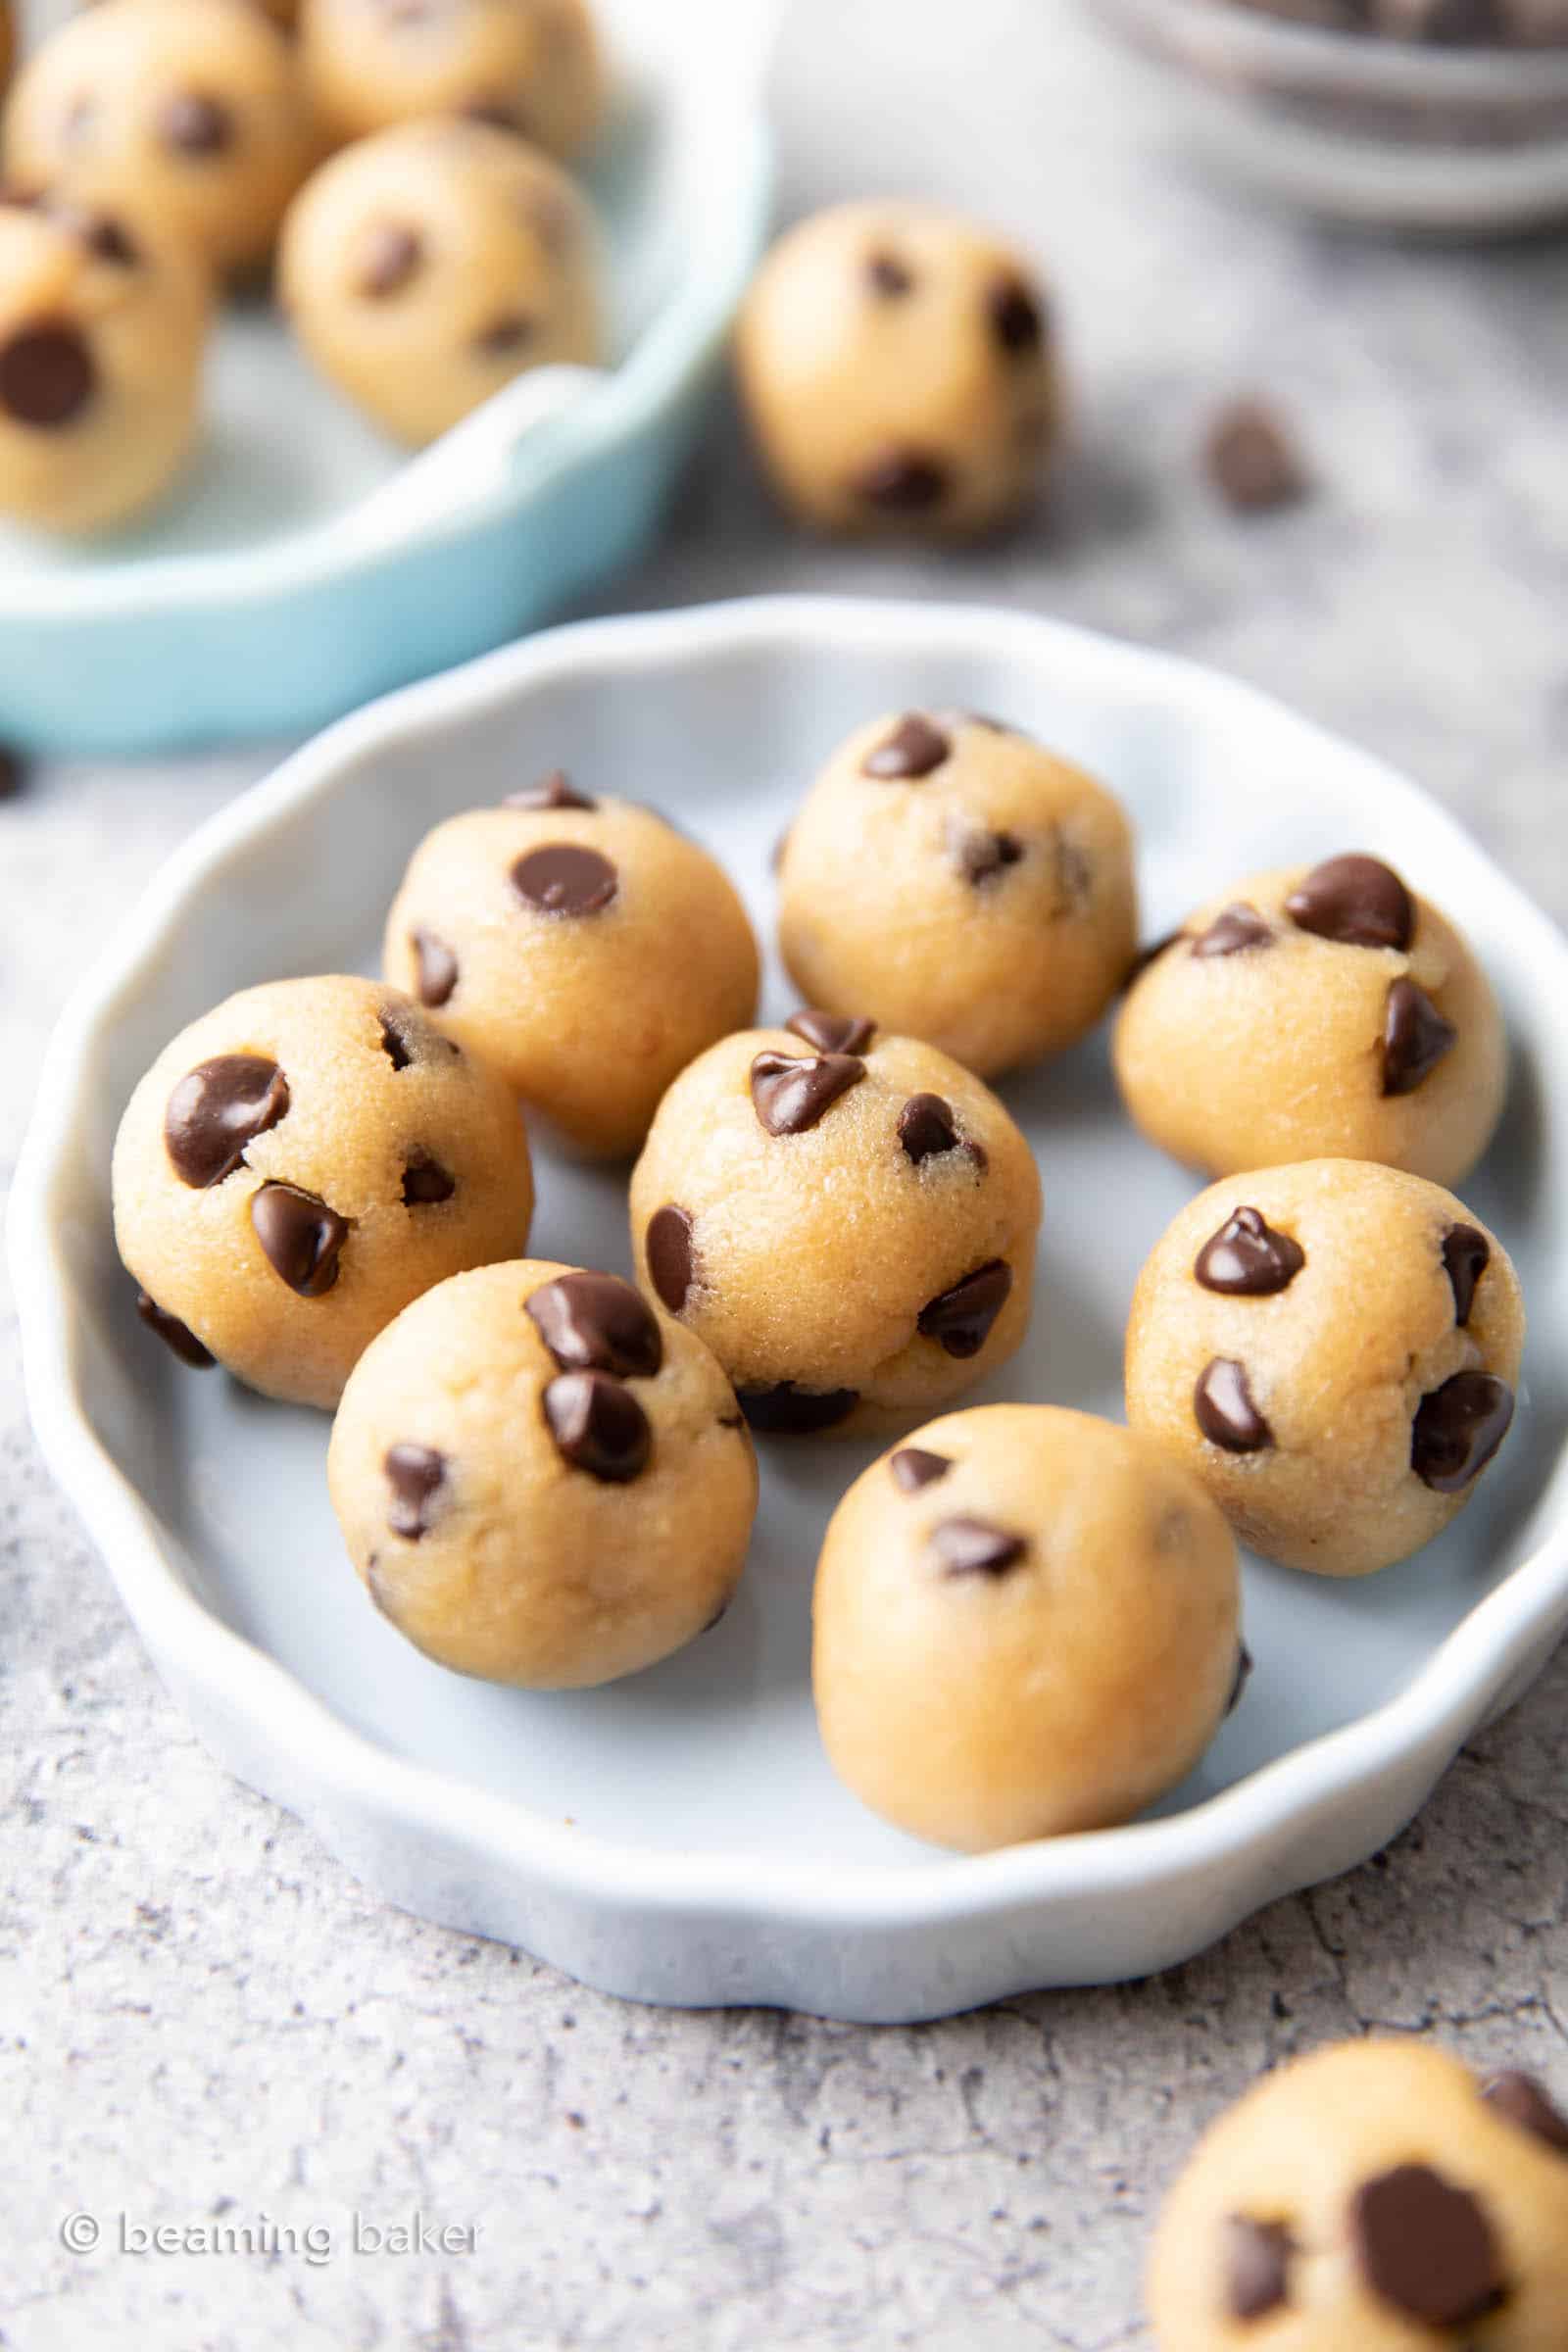 Keto Cookie Dough Bites: an easy 5 ingredient keto cookie dough recipe for rich & buttery keto edible cookie dough! Low Carb, Vegan, Dairy-Free. #CookieDough #Keto #LowCarb #KetoFriendly | Recipe at BeamingBaker.com